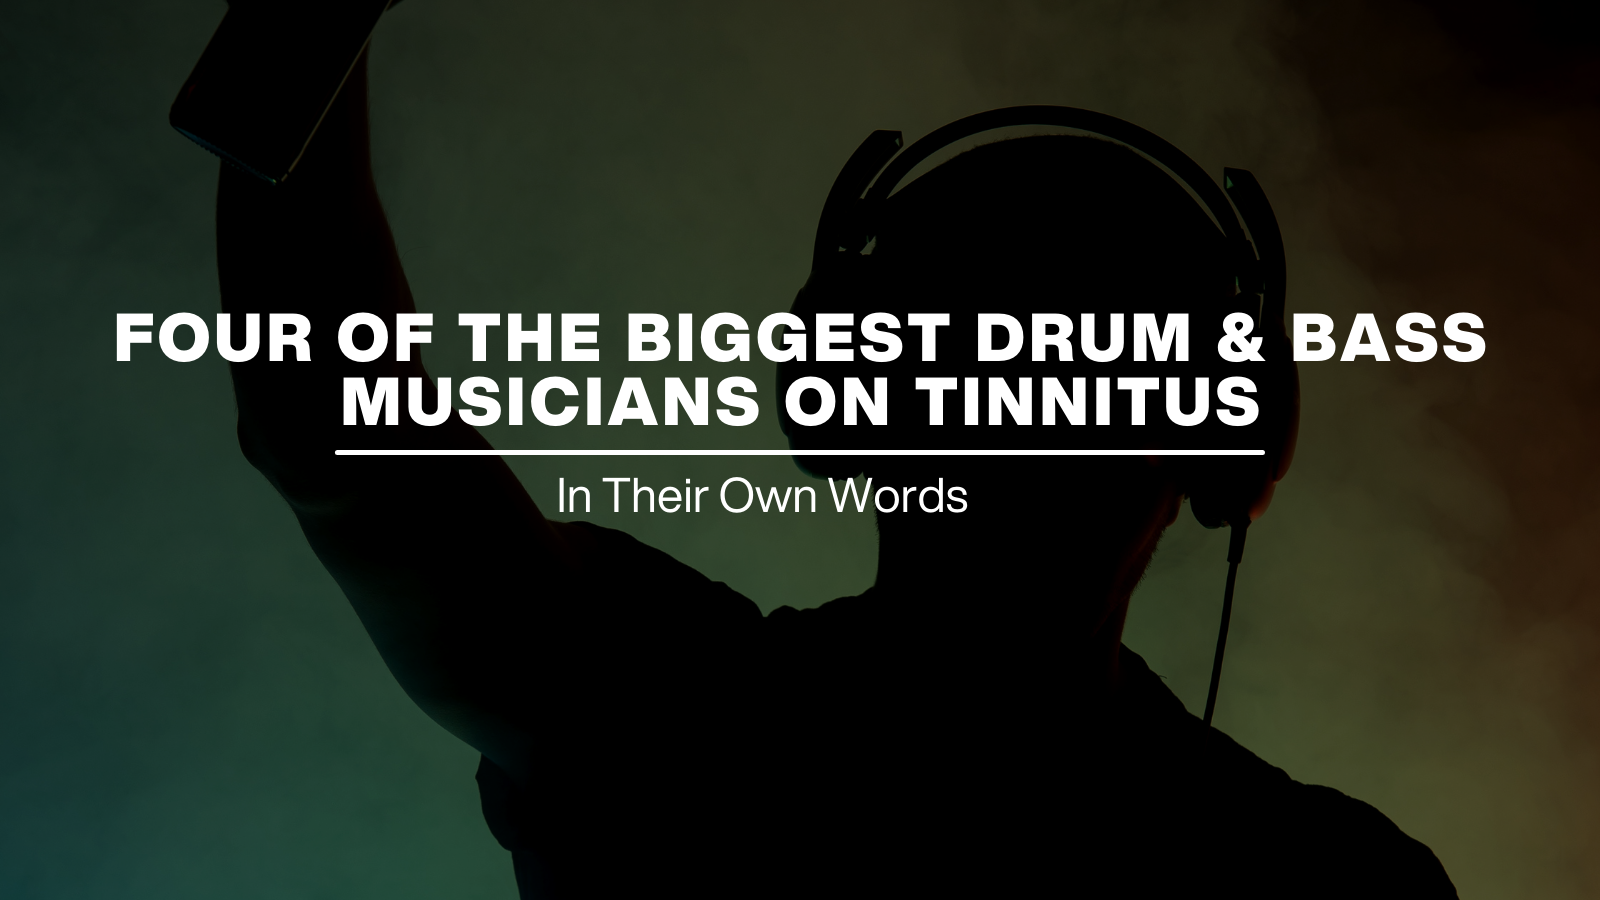 FOUR OF THE BIGGEST DRUM & BASS MUSICIANS ON TINNITUS